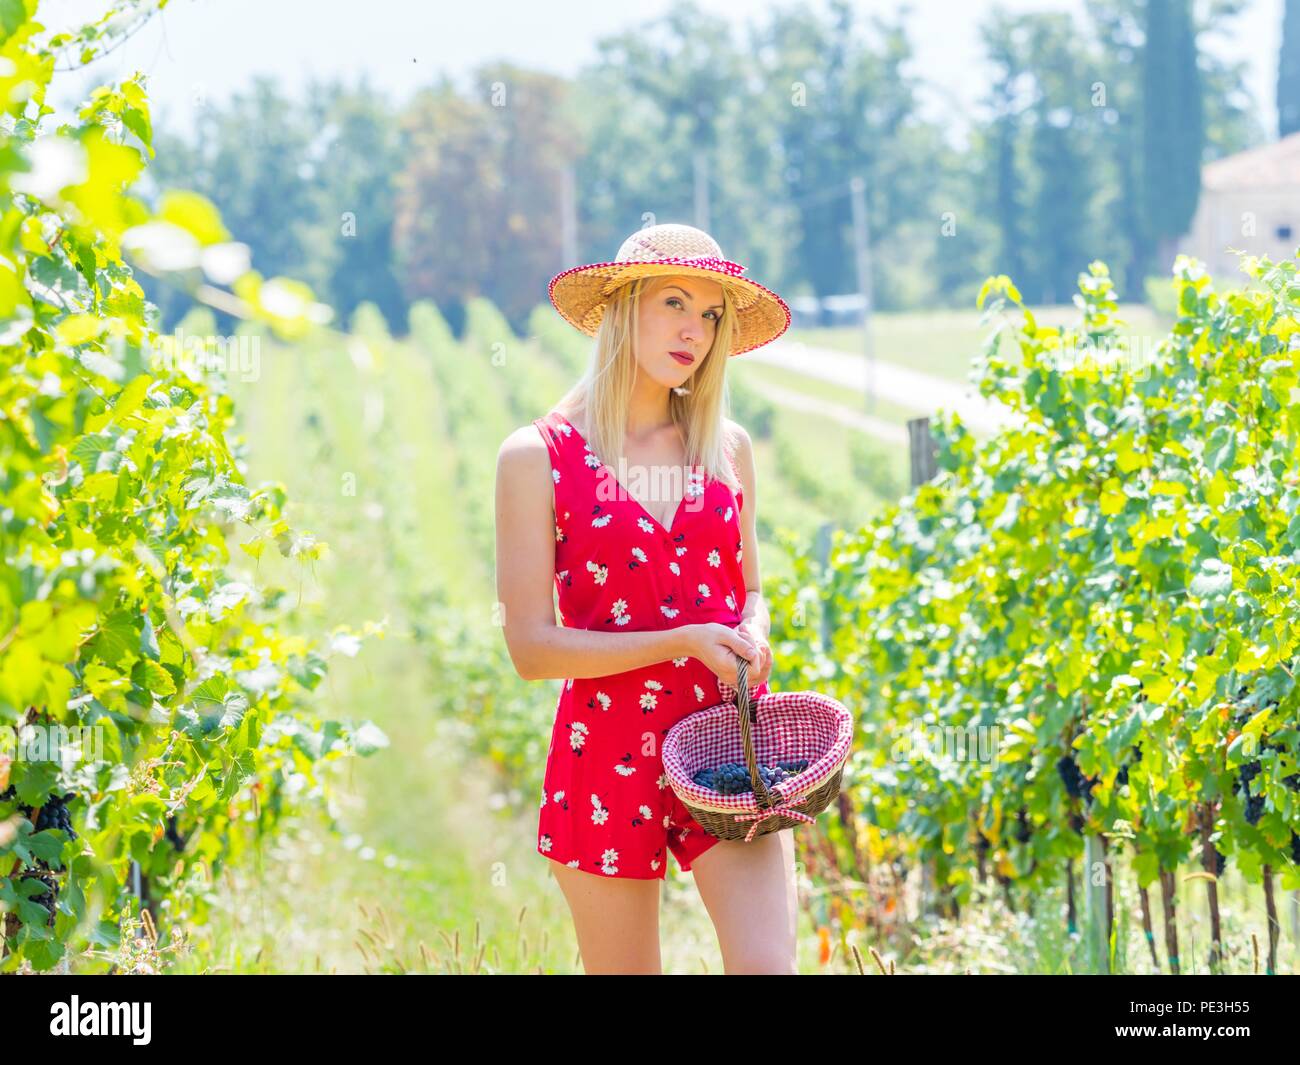 Young woman Stock Photo